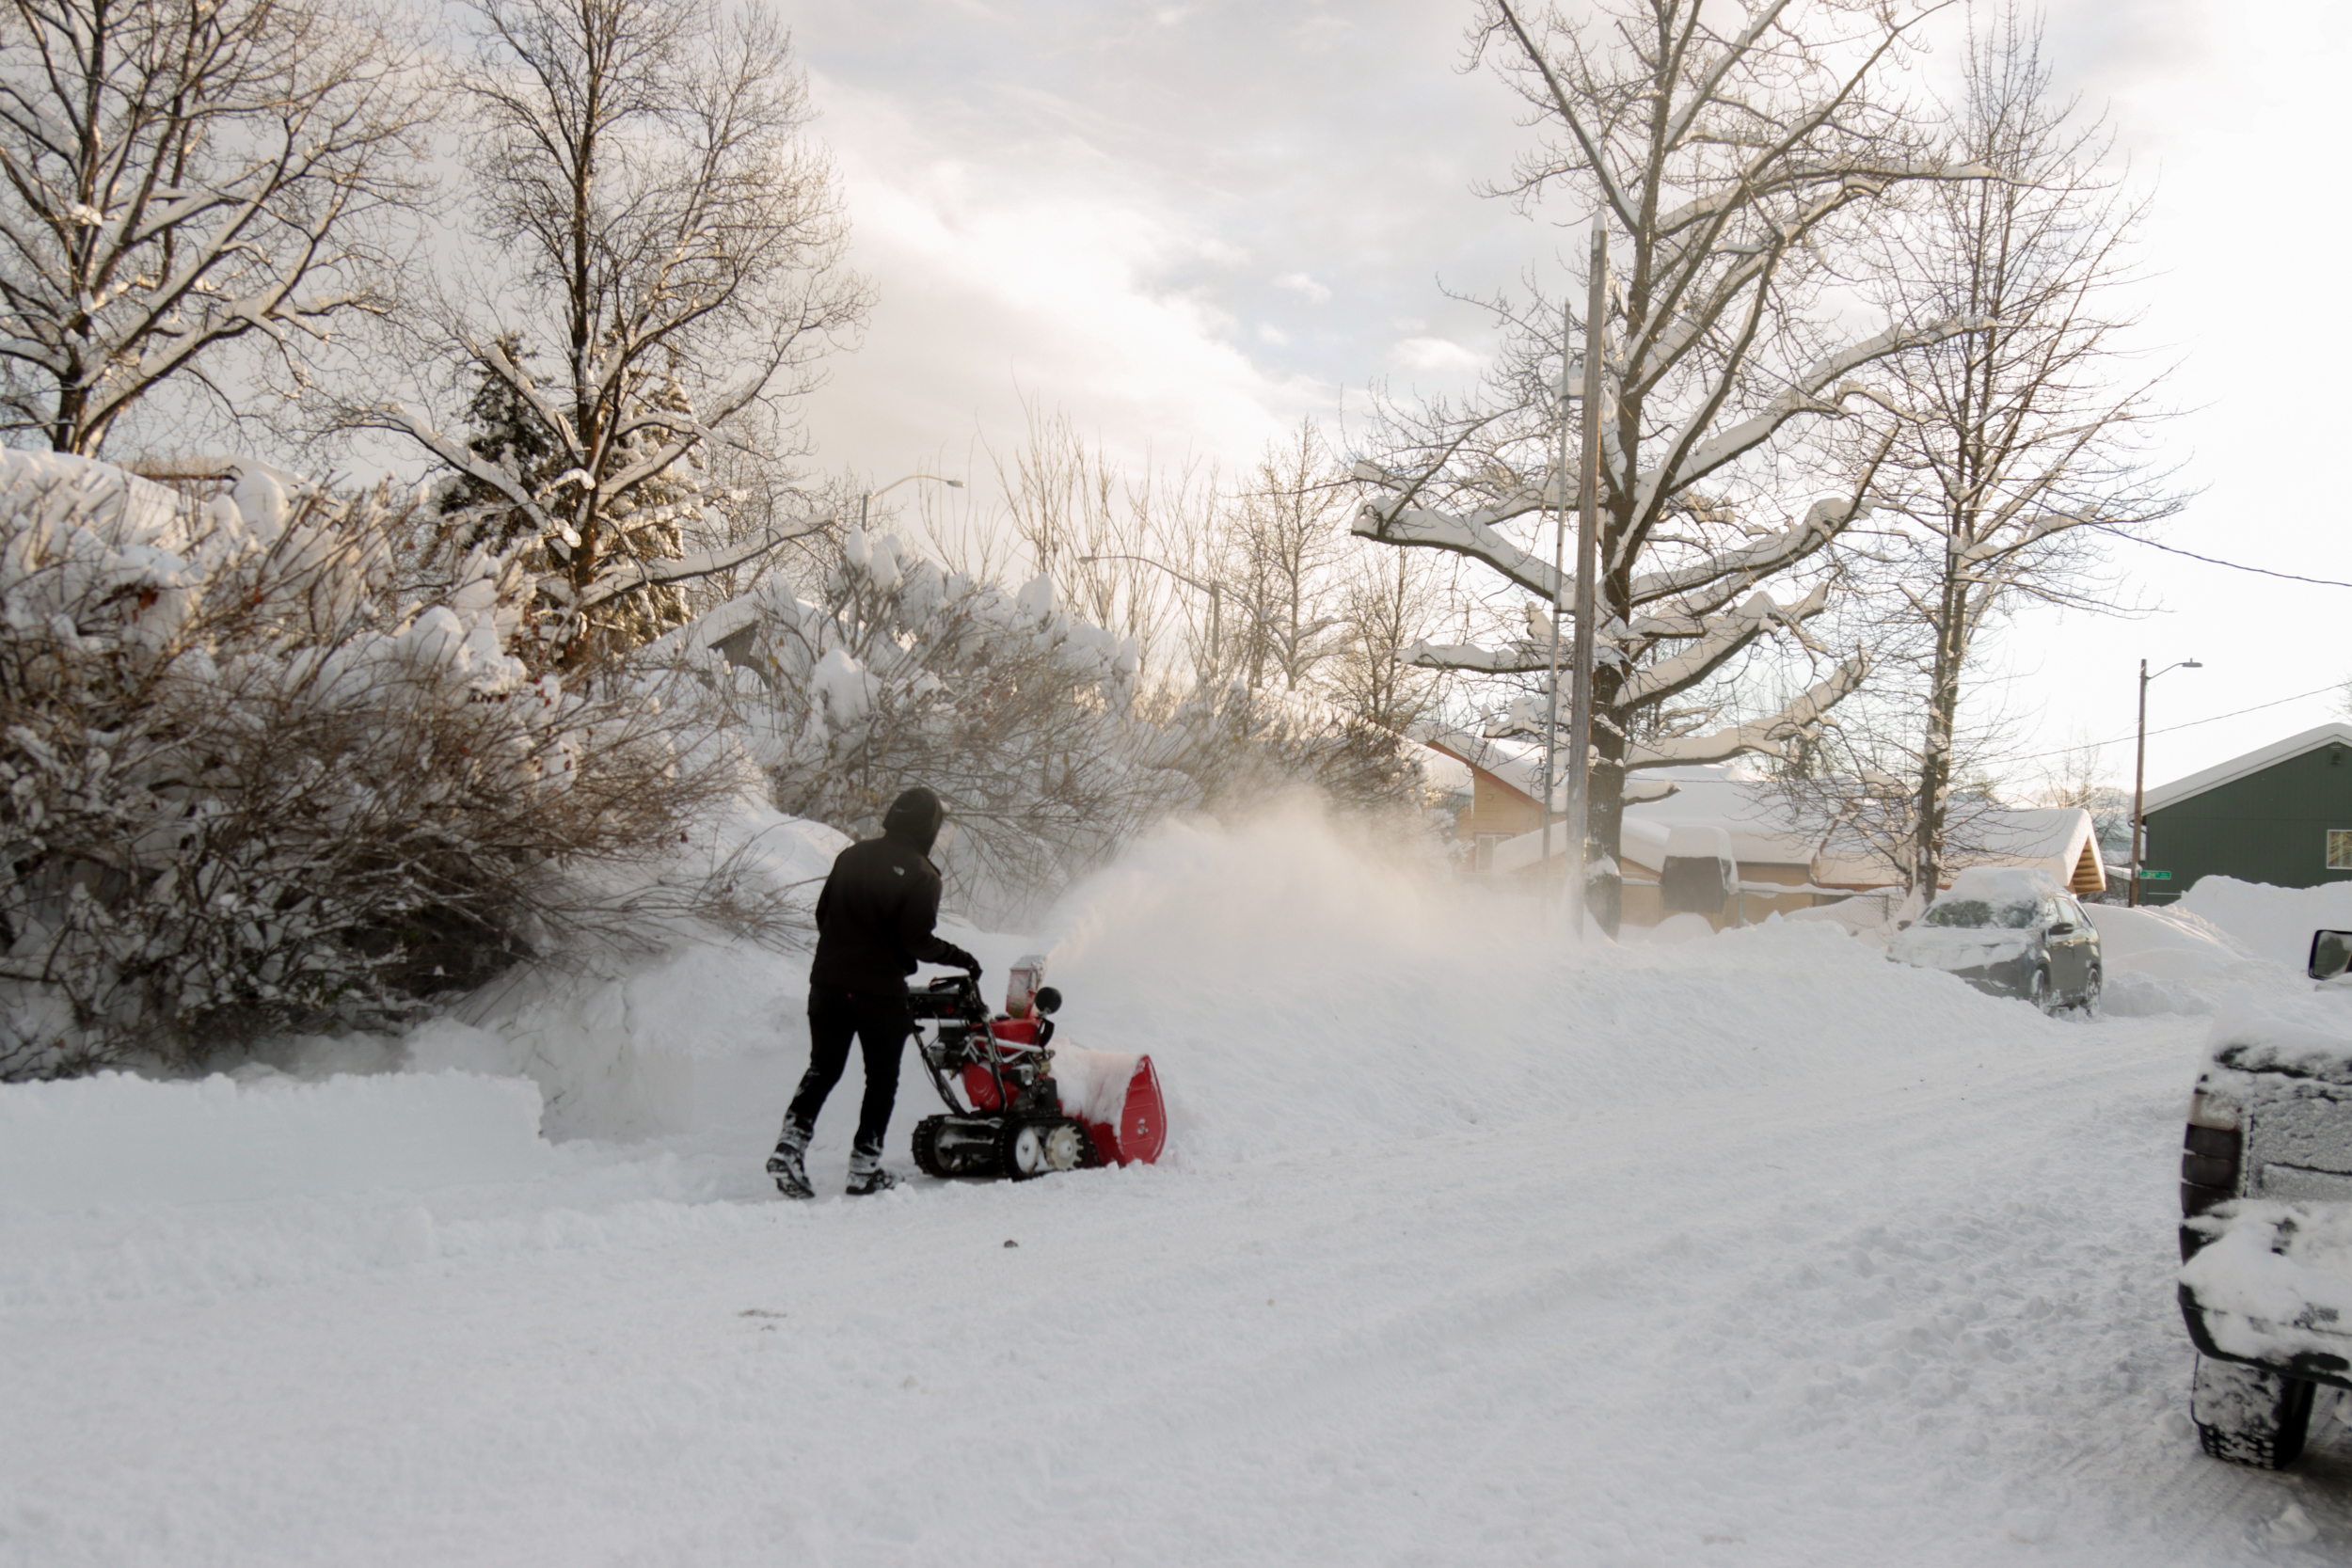 A person uses a red snow blower.